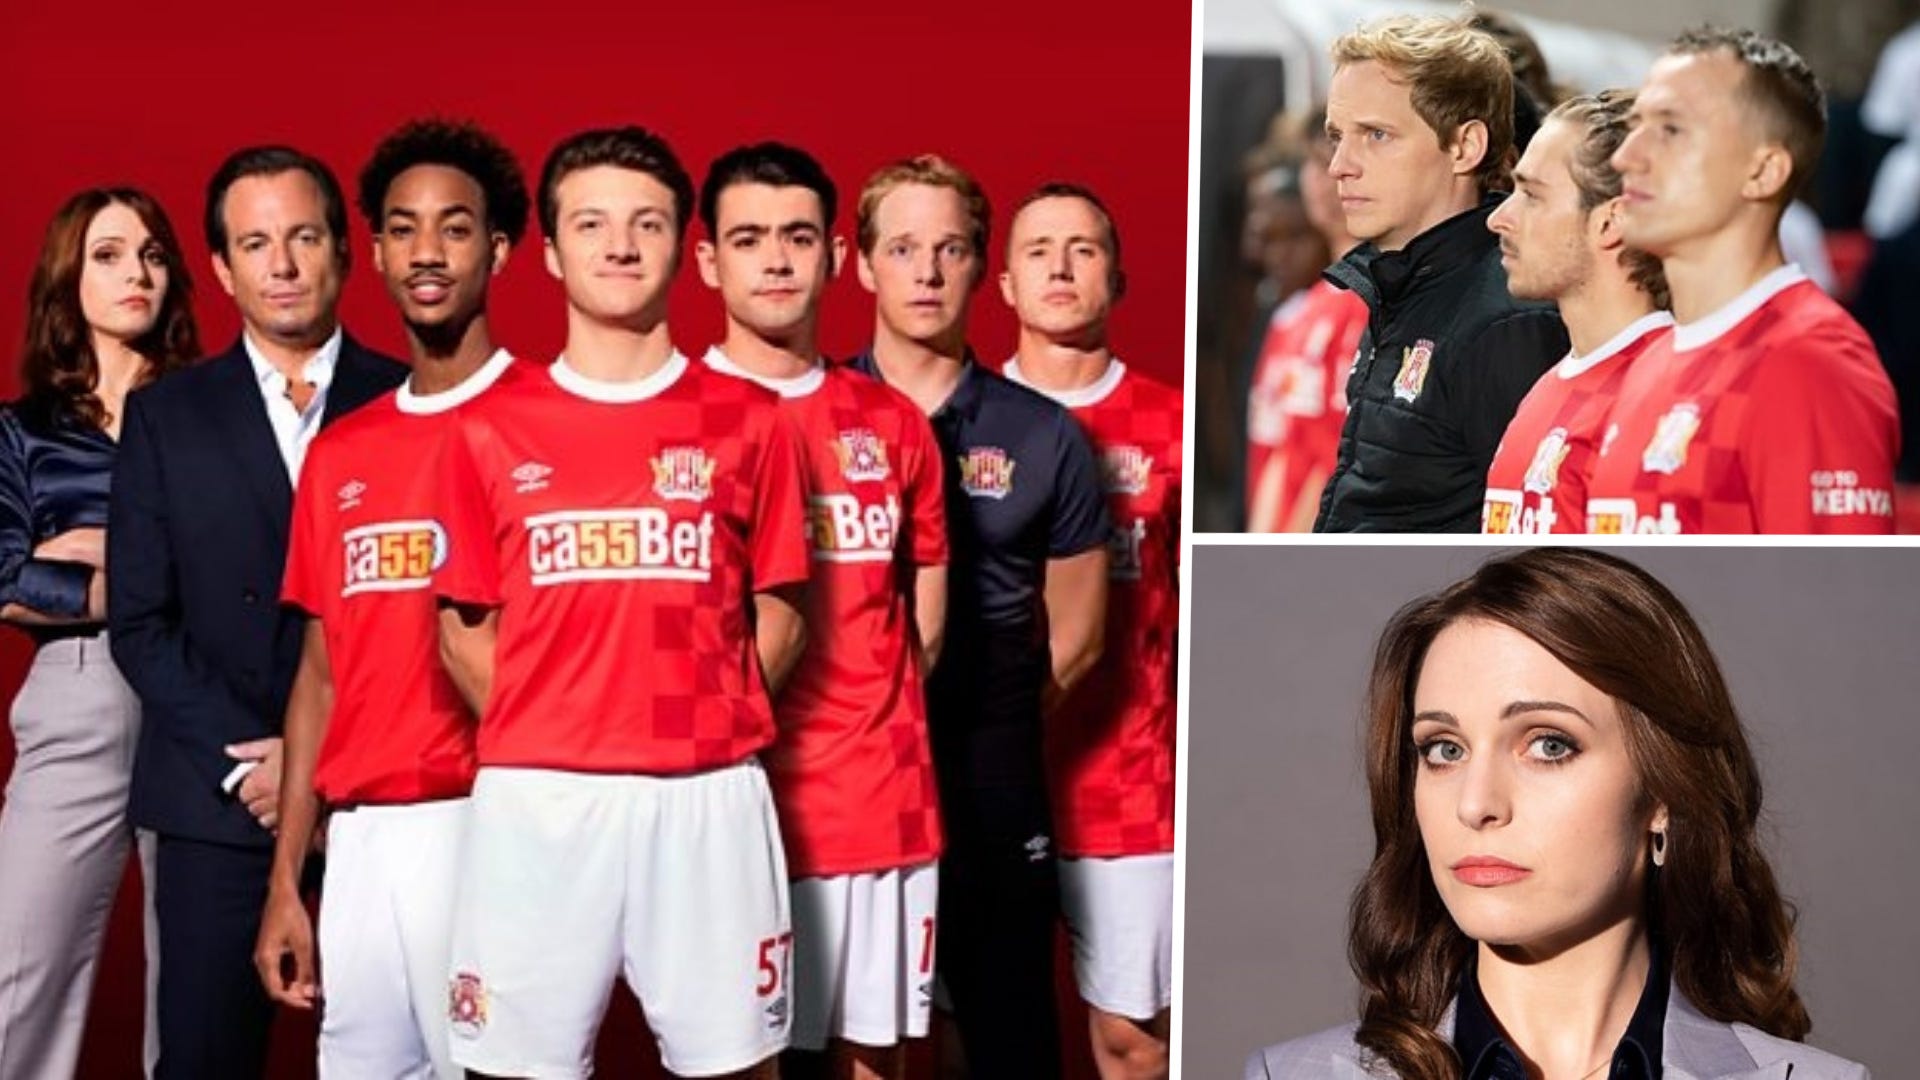 The First Team Release date, trailer, cast and how to watch new football comedy series Goal